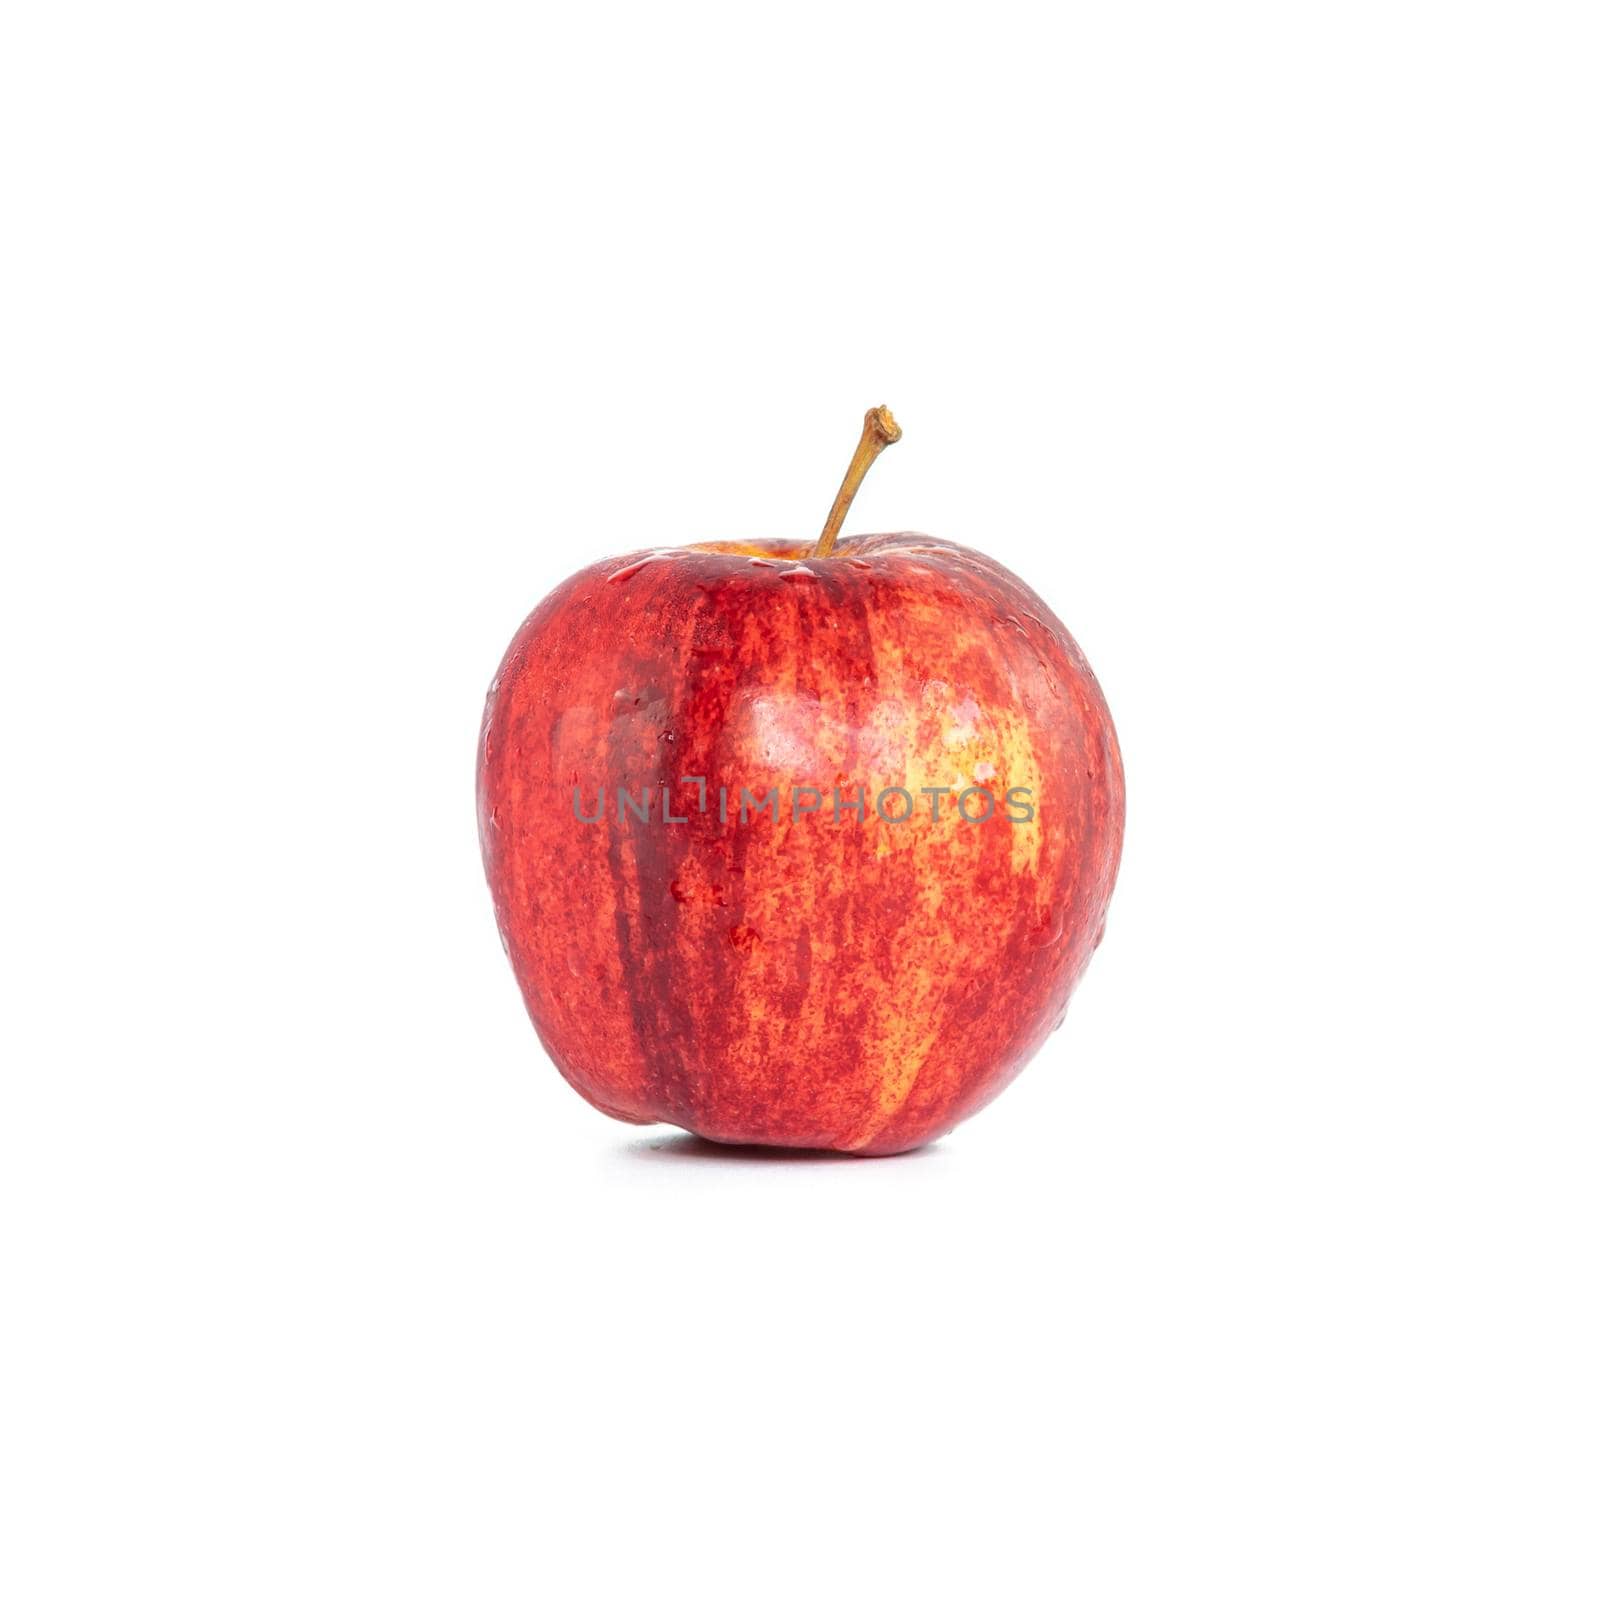 Single red apple isolated on white background by wattanaphob